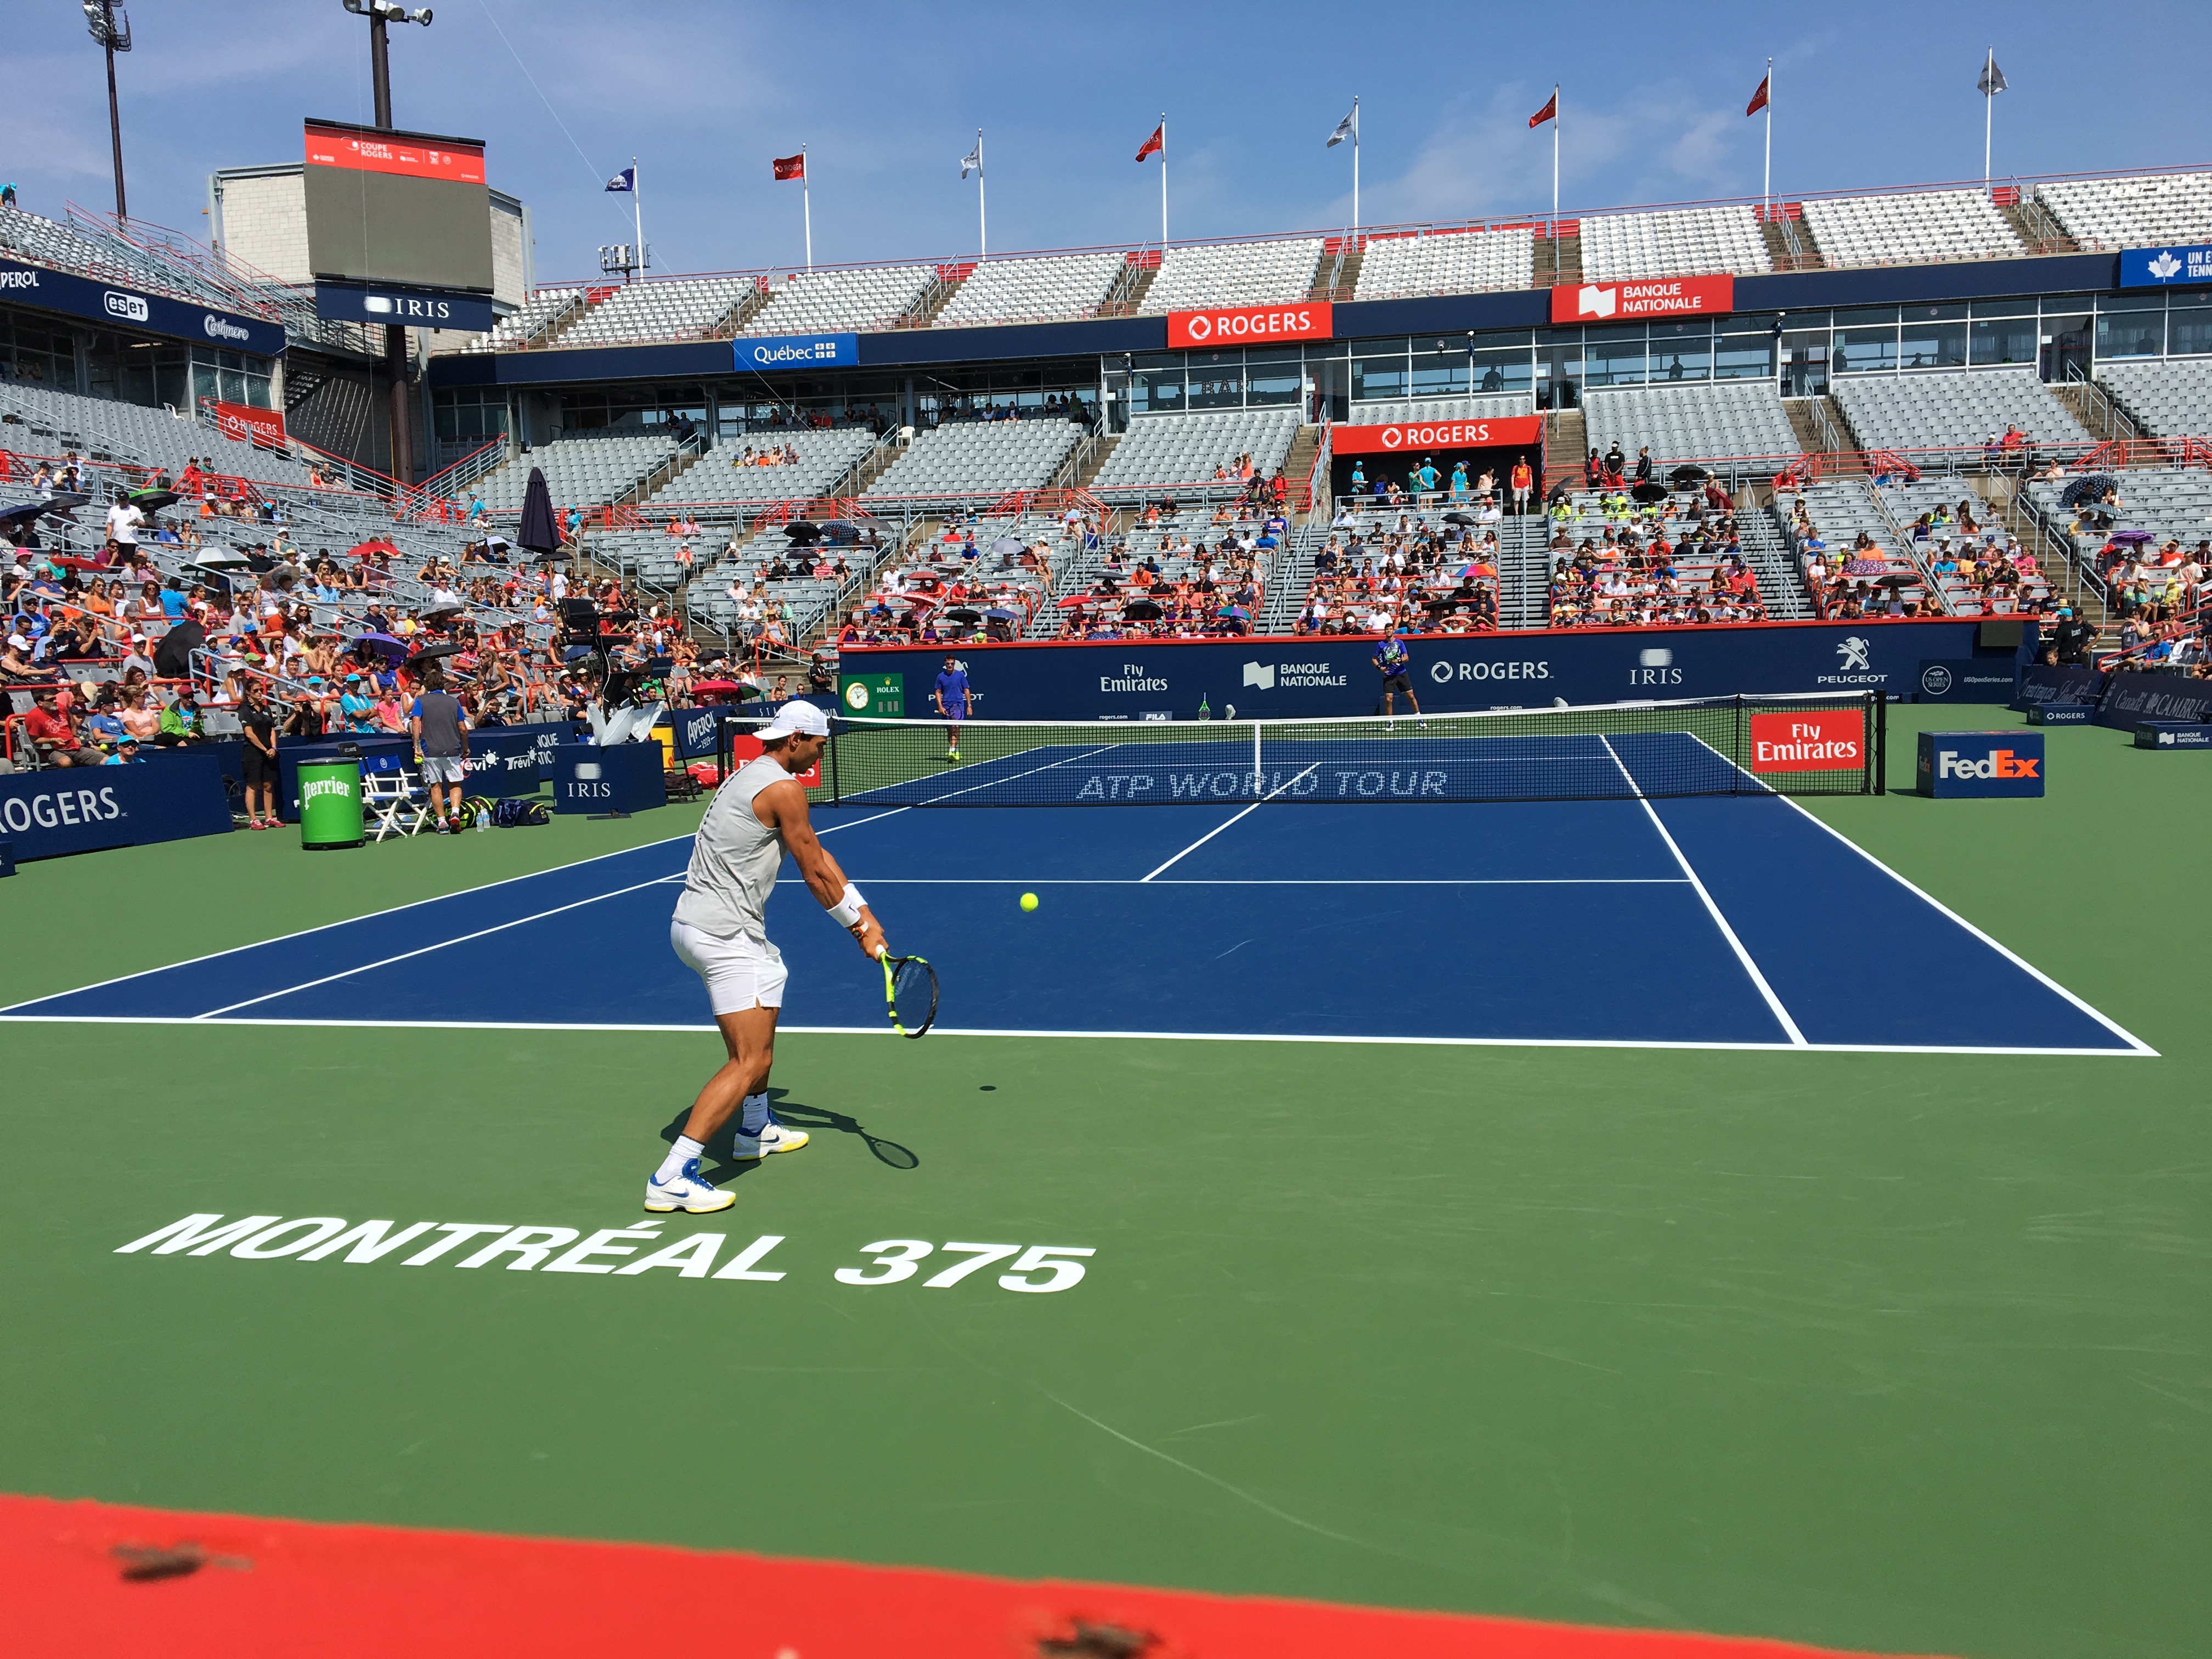 Tennis anyone? Rogers Cup serving up aces in Montreal